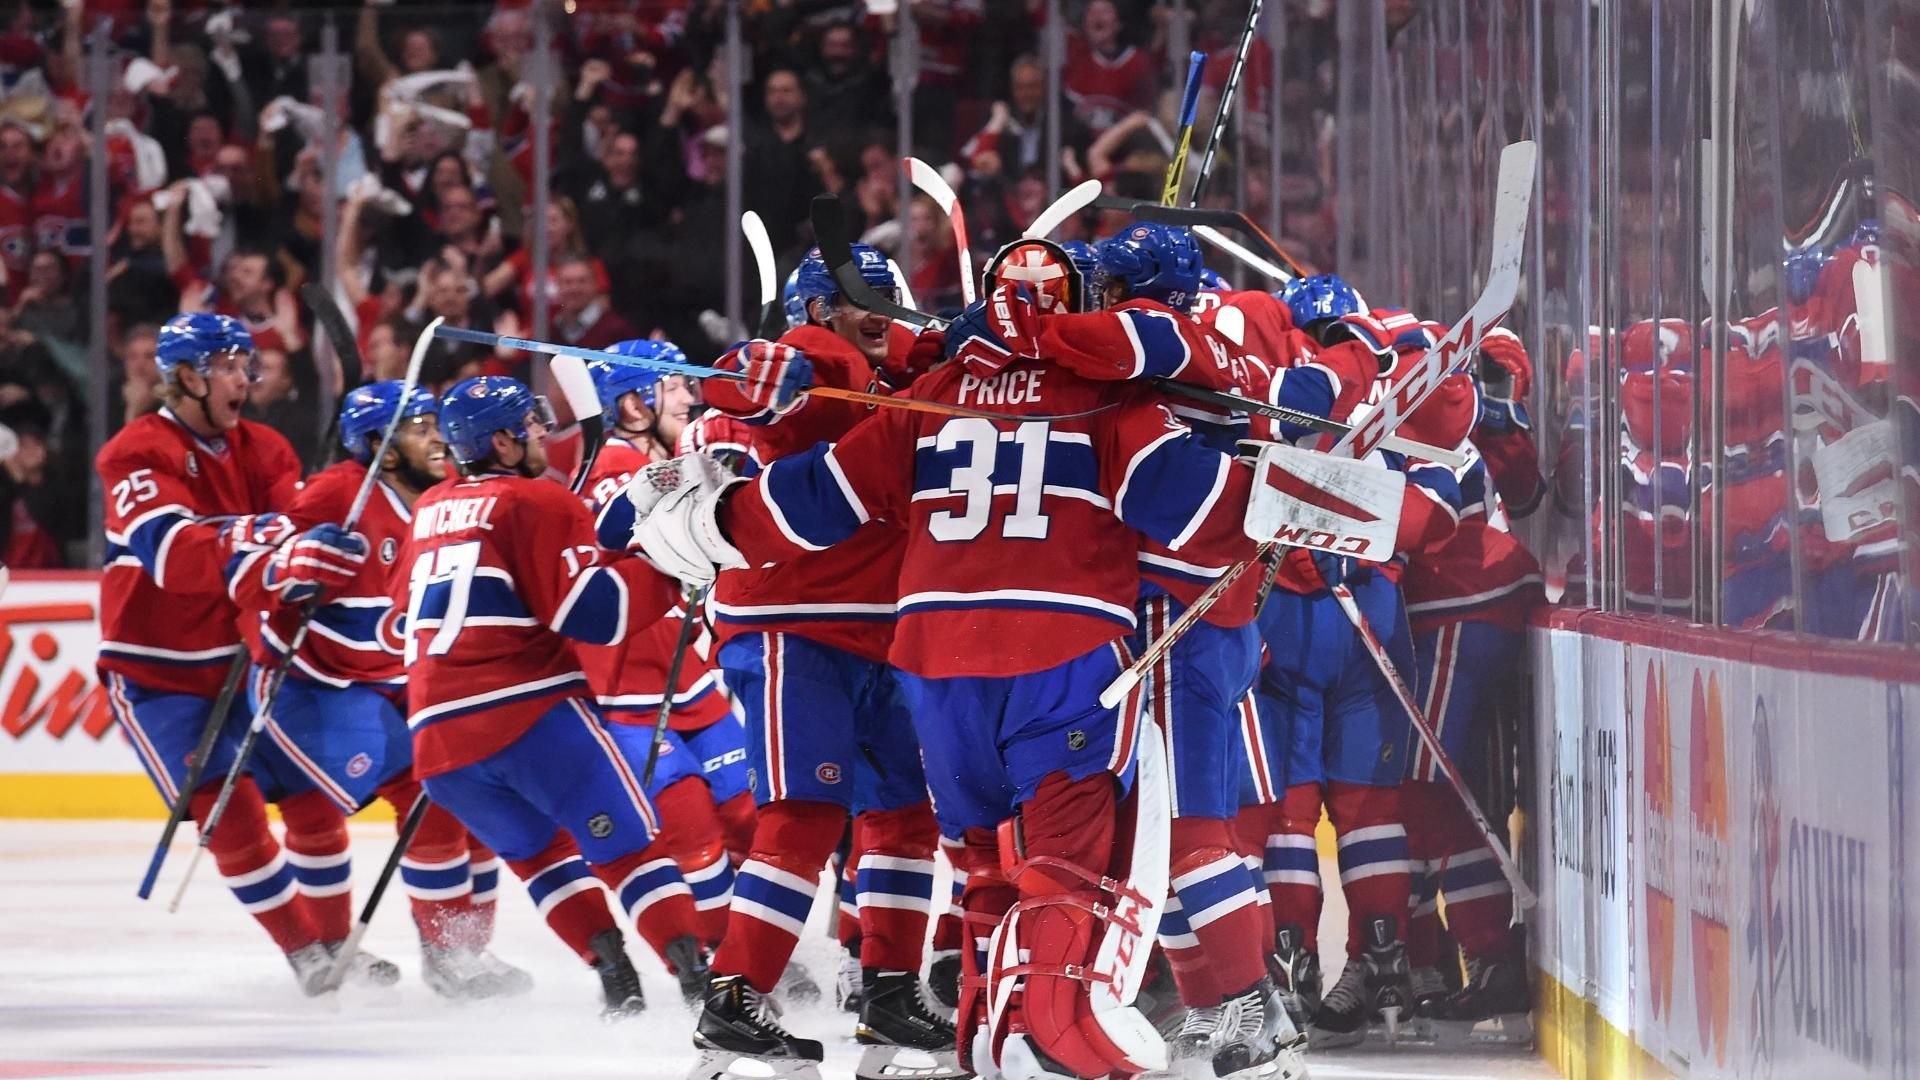 Montreal Canadiens NHL hockey wallpapers, Team loyalty, Historical franchise, Exciting game action, 1920x1080 Full HD Desktop